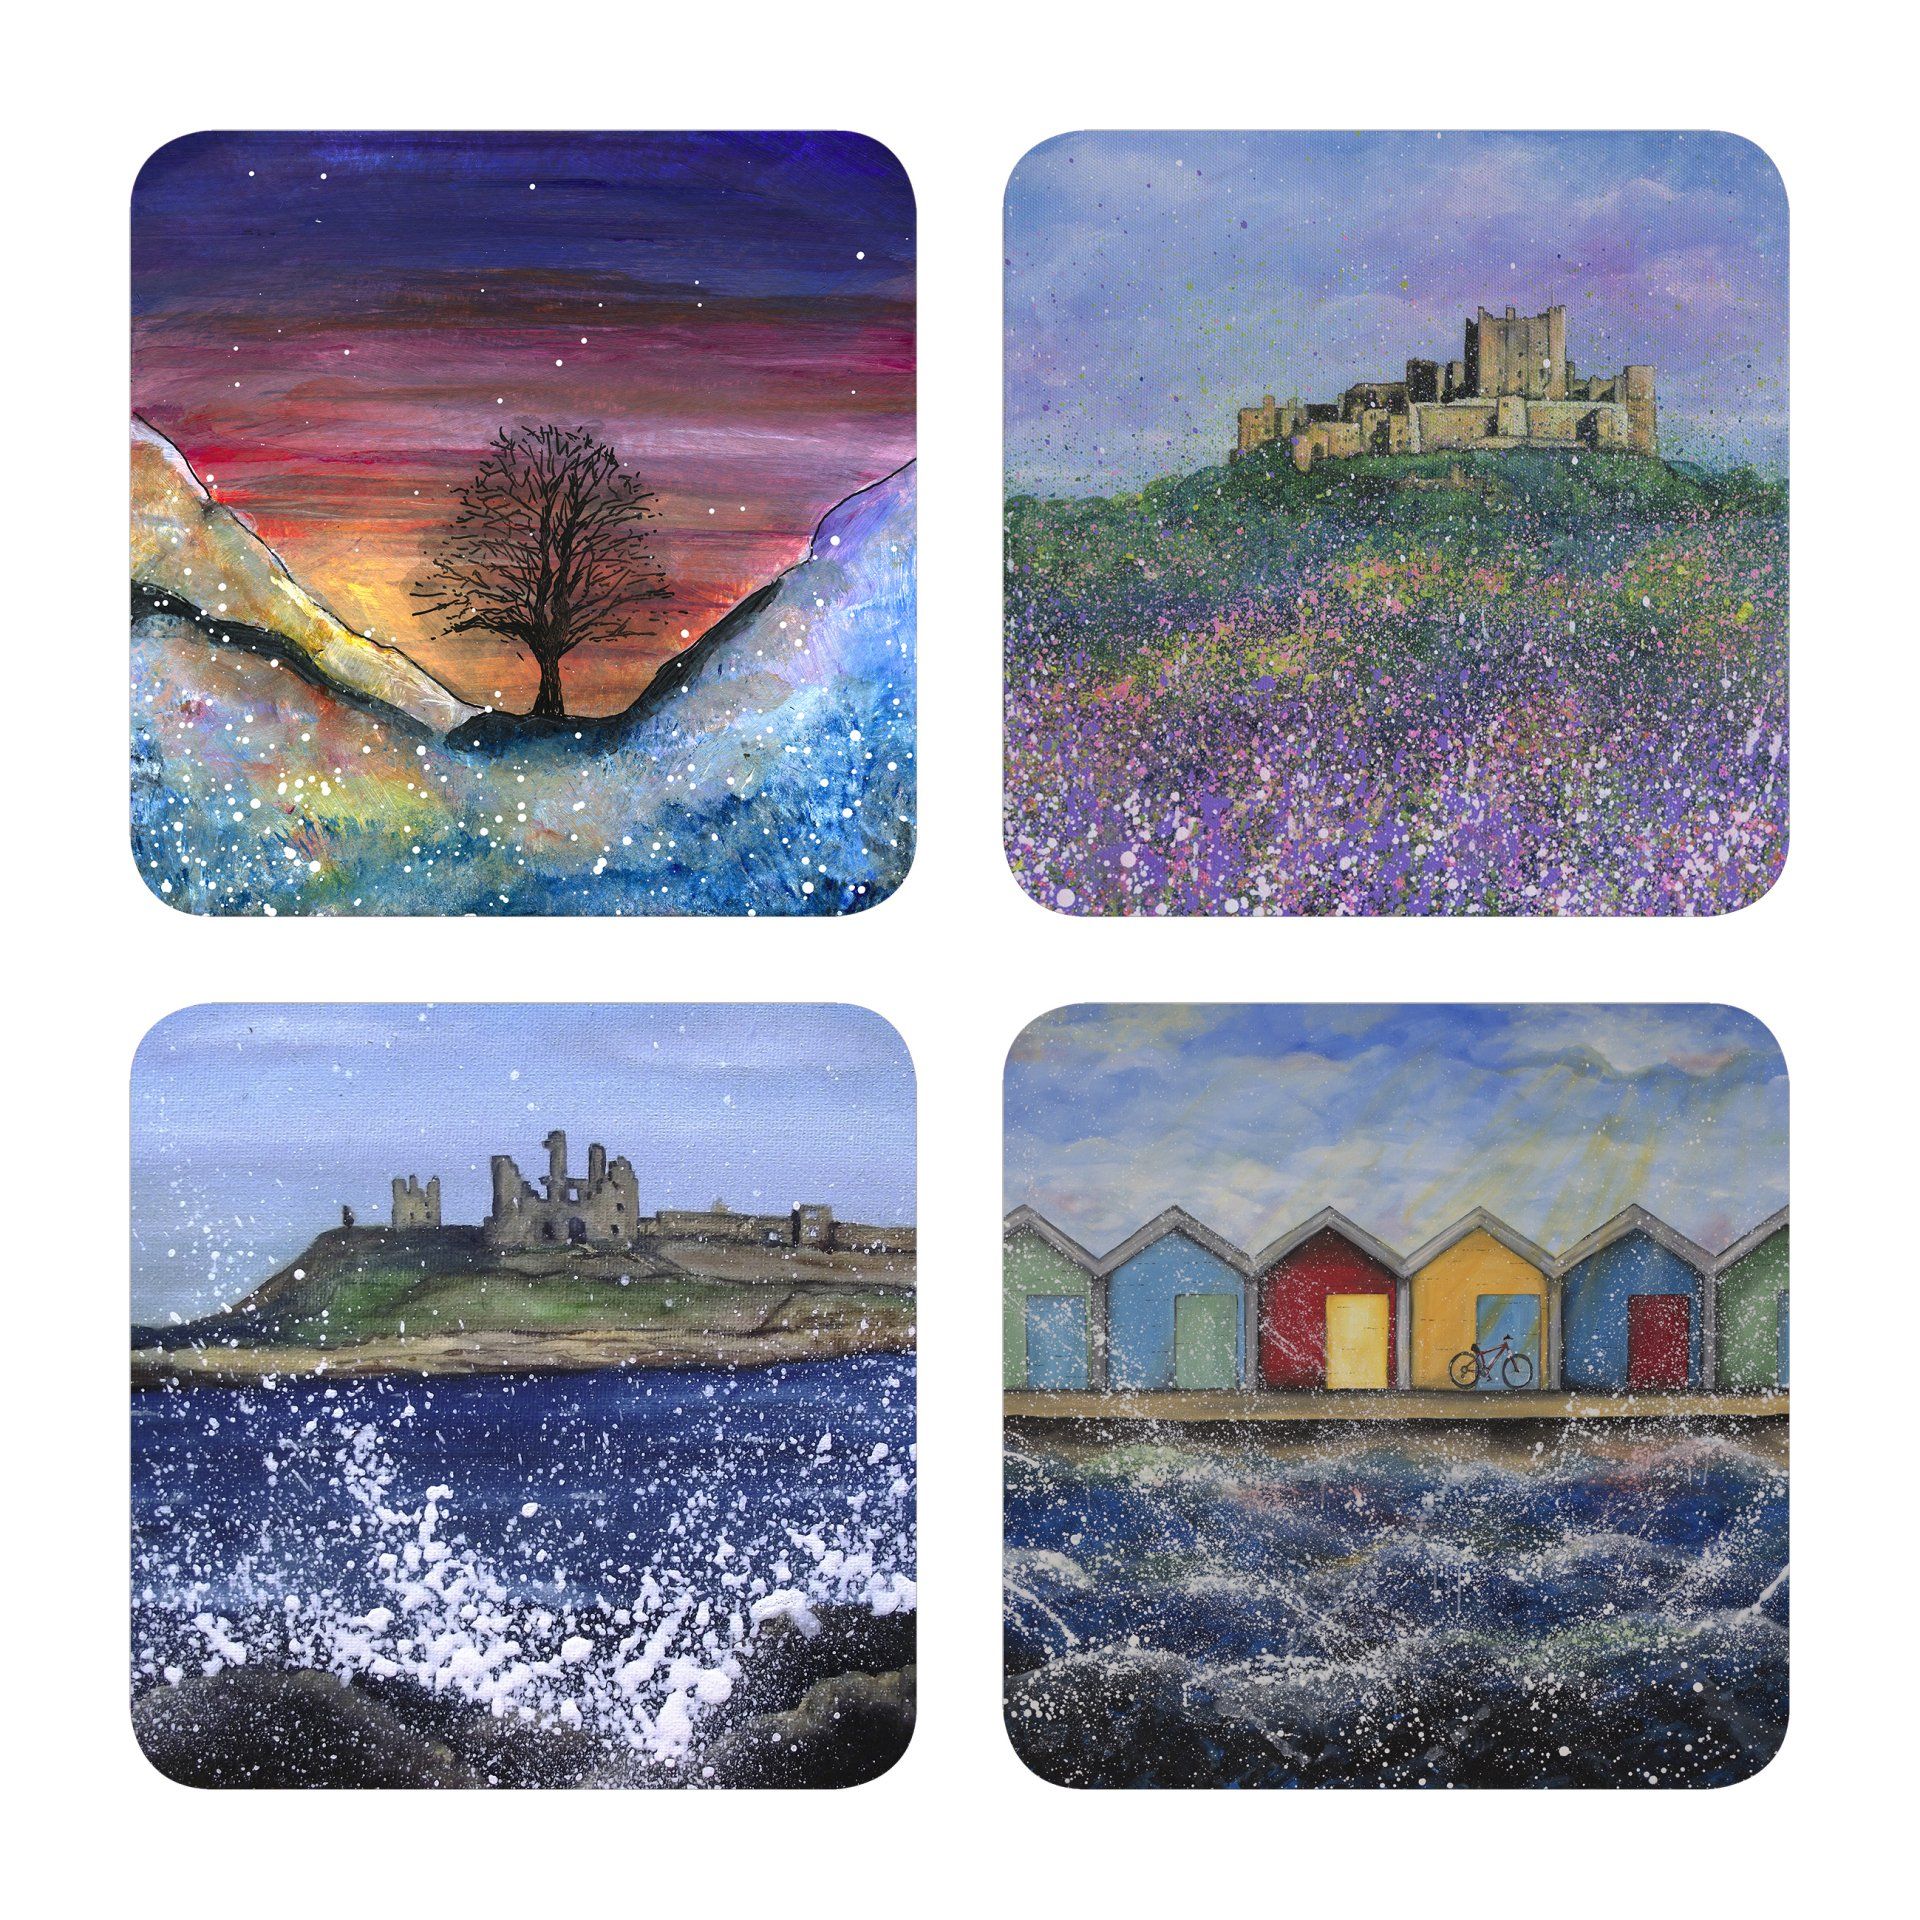 gifts from Northumberland, sycamore gap, Blyth Beach huts, Holy Island, Bamburgh Castle, Gifts under £20, Gifts from Northumberland, Gifts for him, Gifts for her, Northumberland art, Northumberland artist